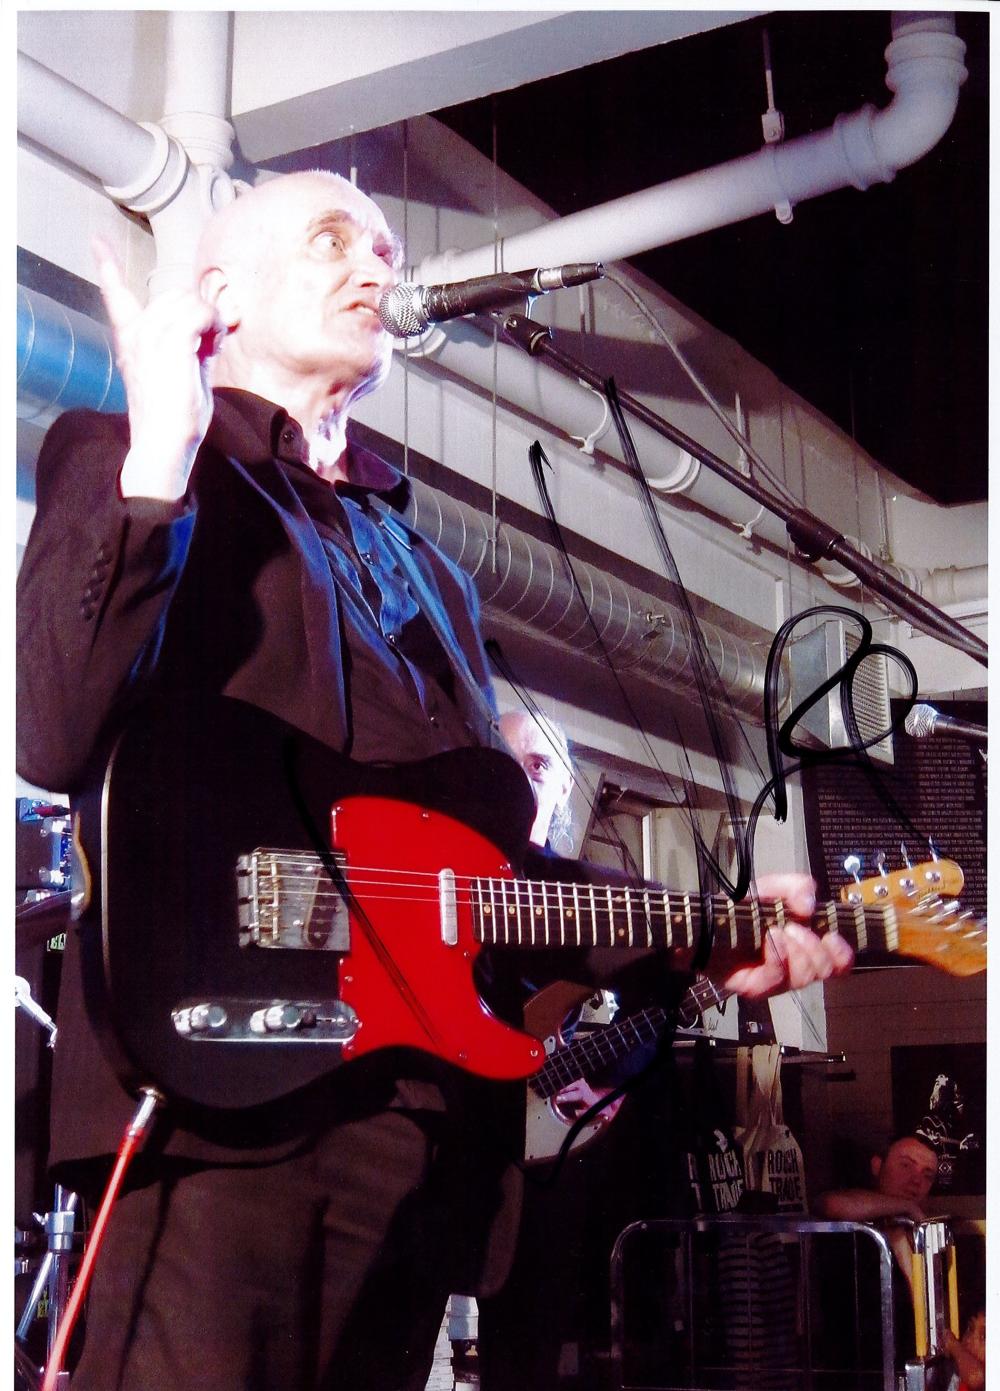 English Guitarist Wilko Johnson Personally Signed 12x8 Colour Photo. Signed in black marker pen at